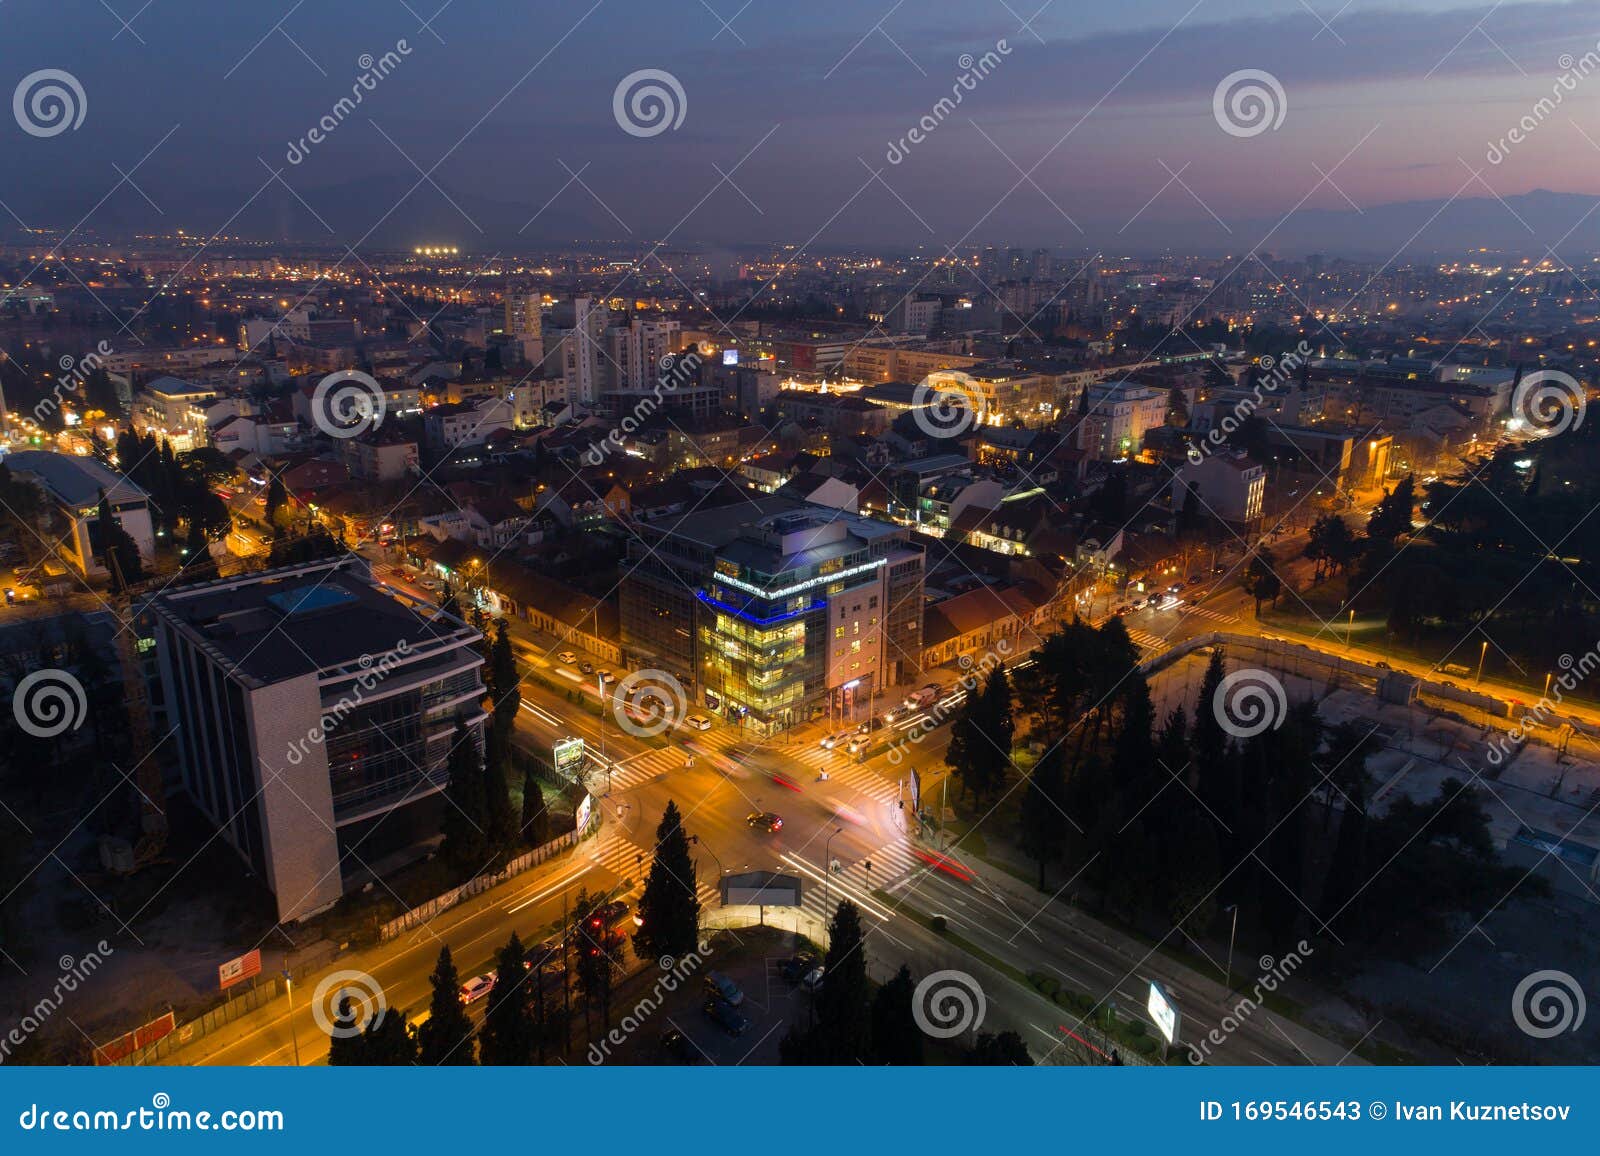 aerial view of podgorica city after sunset